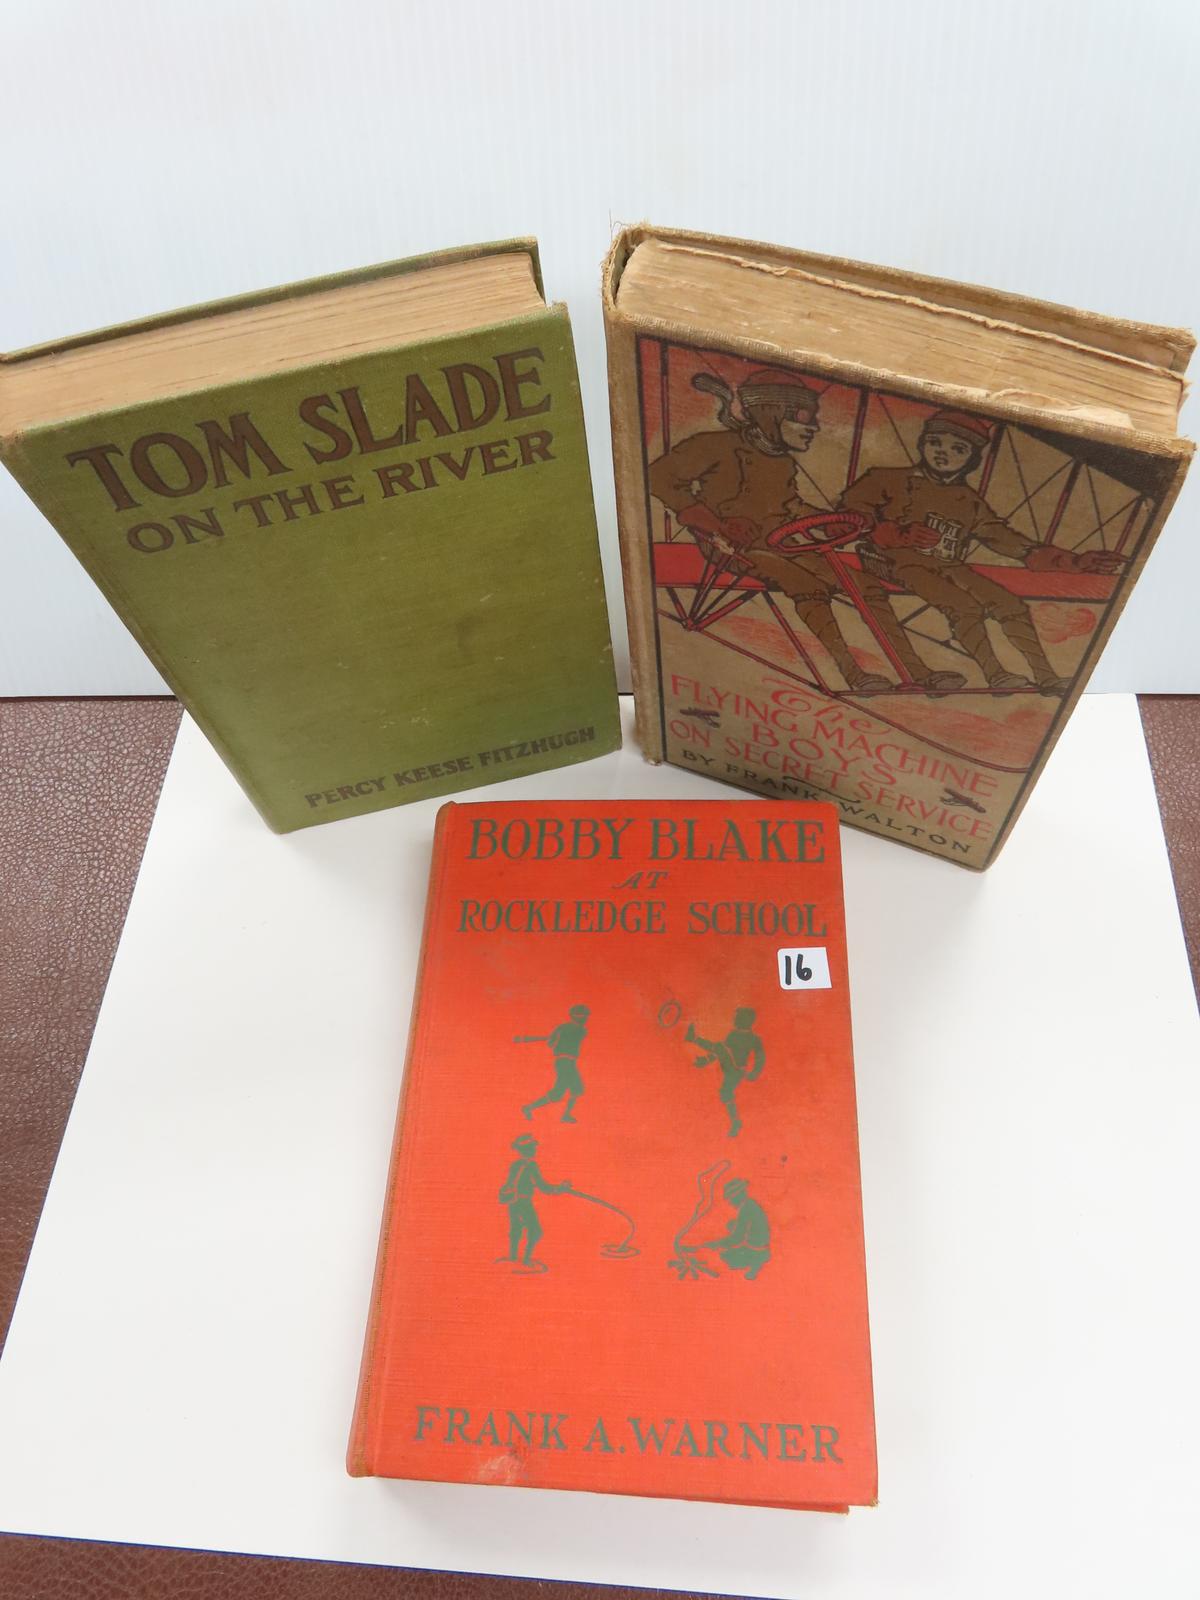 Three (3) Old Books For One Money: 1915 Bobby Blake at Rockledge School, 1917 Tom Slade on the River